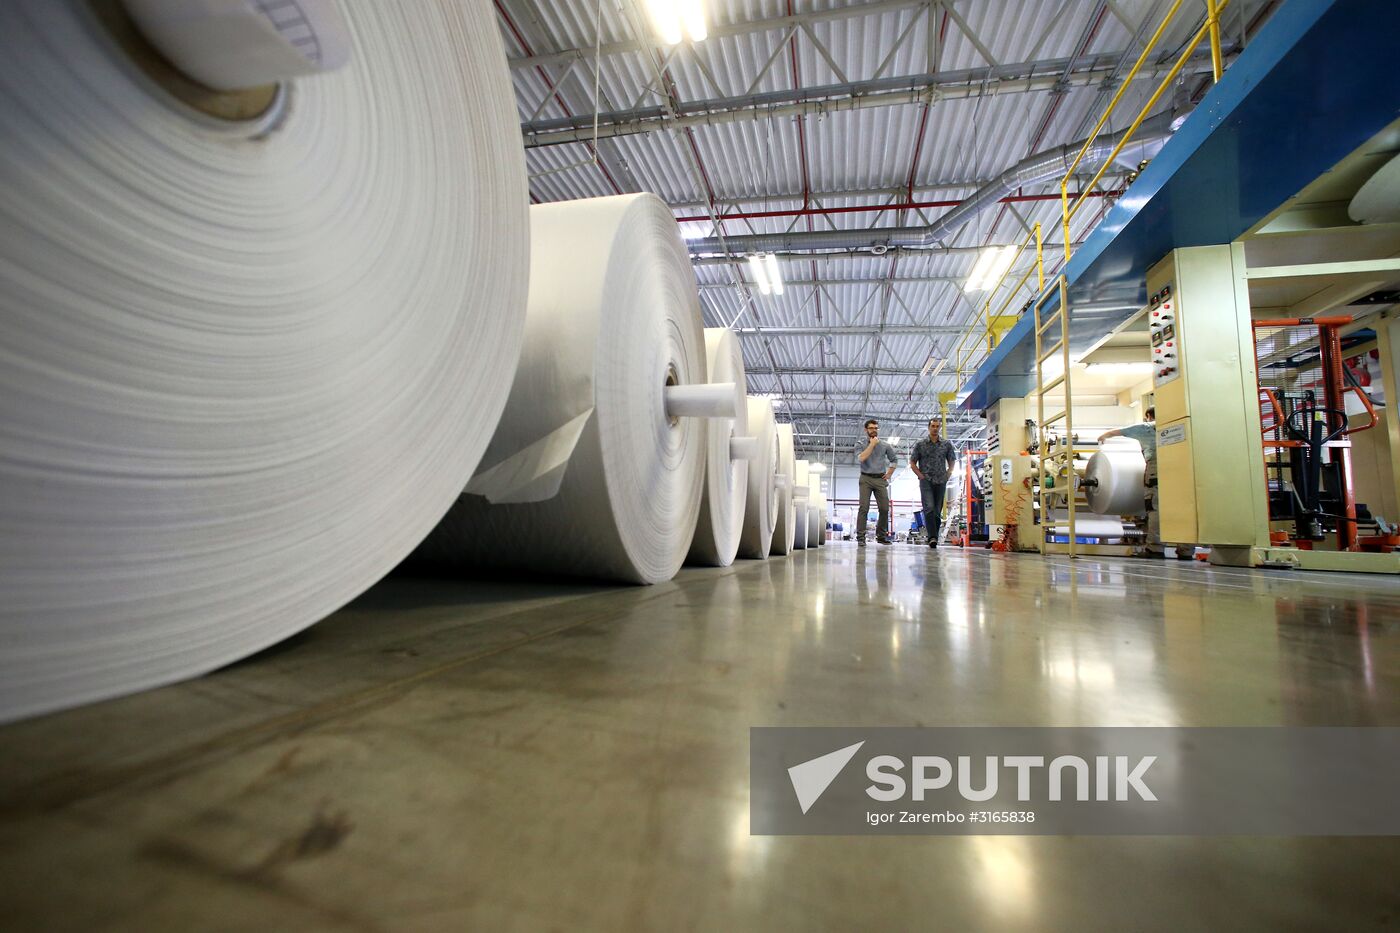 Manufacturing of thermal receipt paper in Kalinigrad